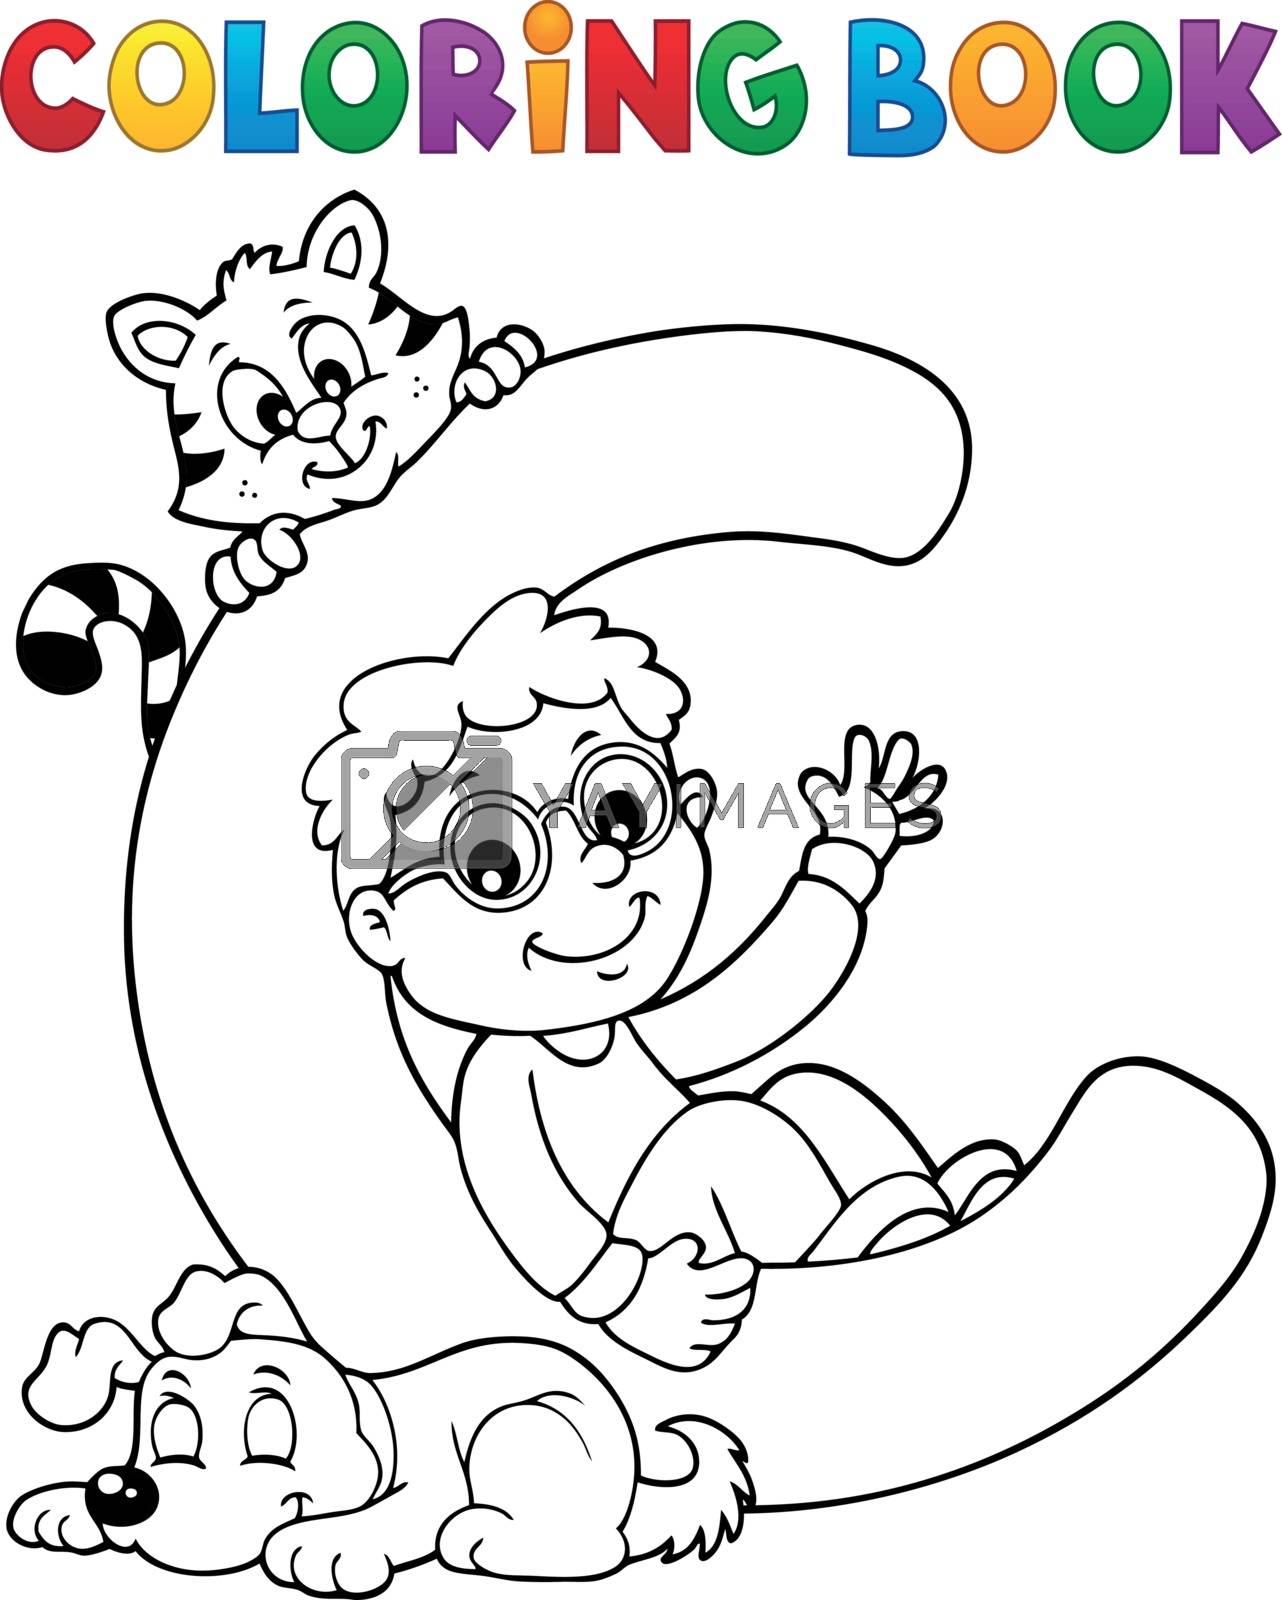 Coloring book boy and pets by letter C - eps10 vector illustration.